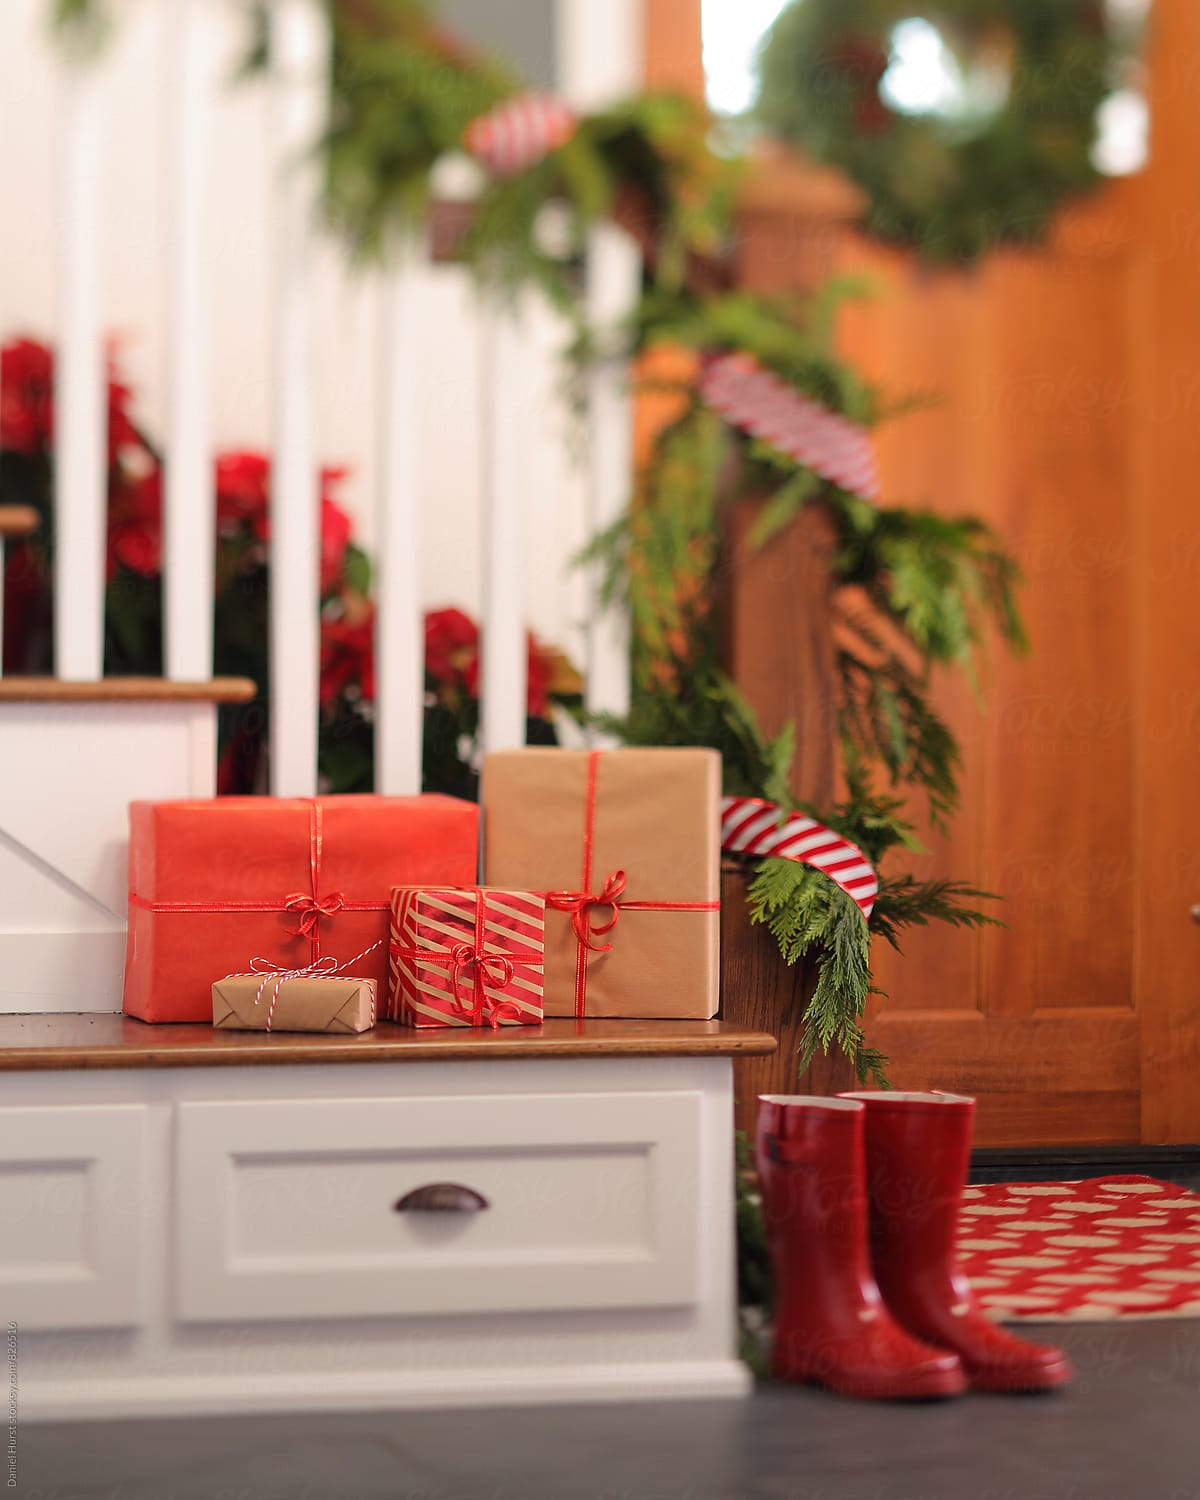 Red boots and Christmas gifts in home entry